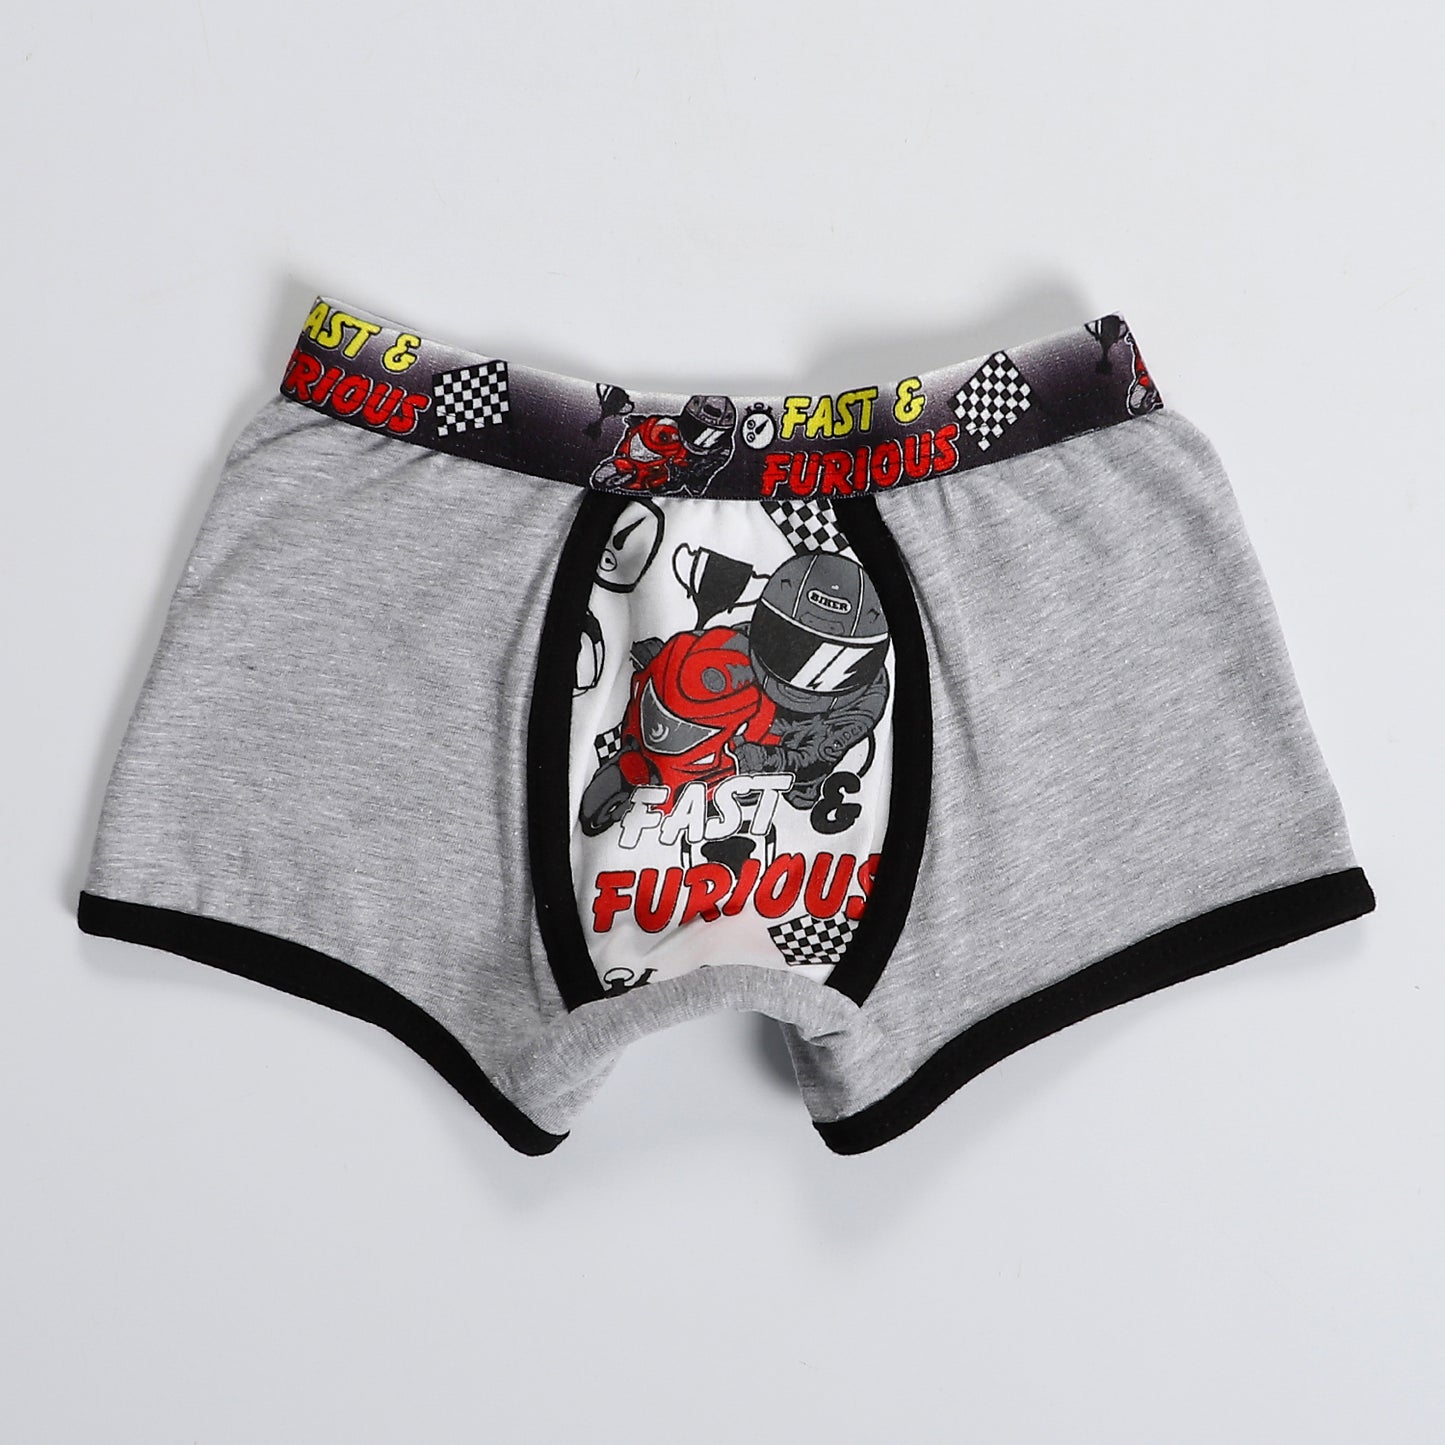 Boy's underwear "Boxer party" (pack of 3)